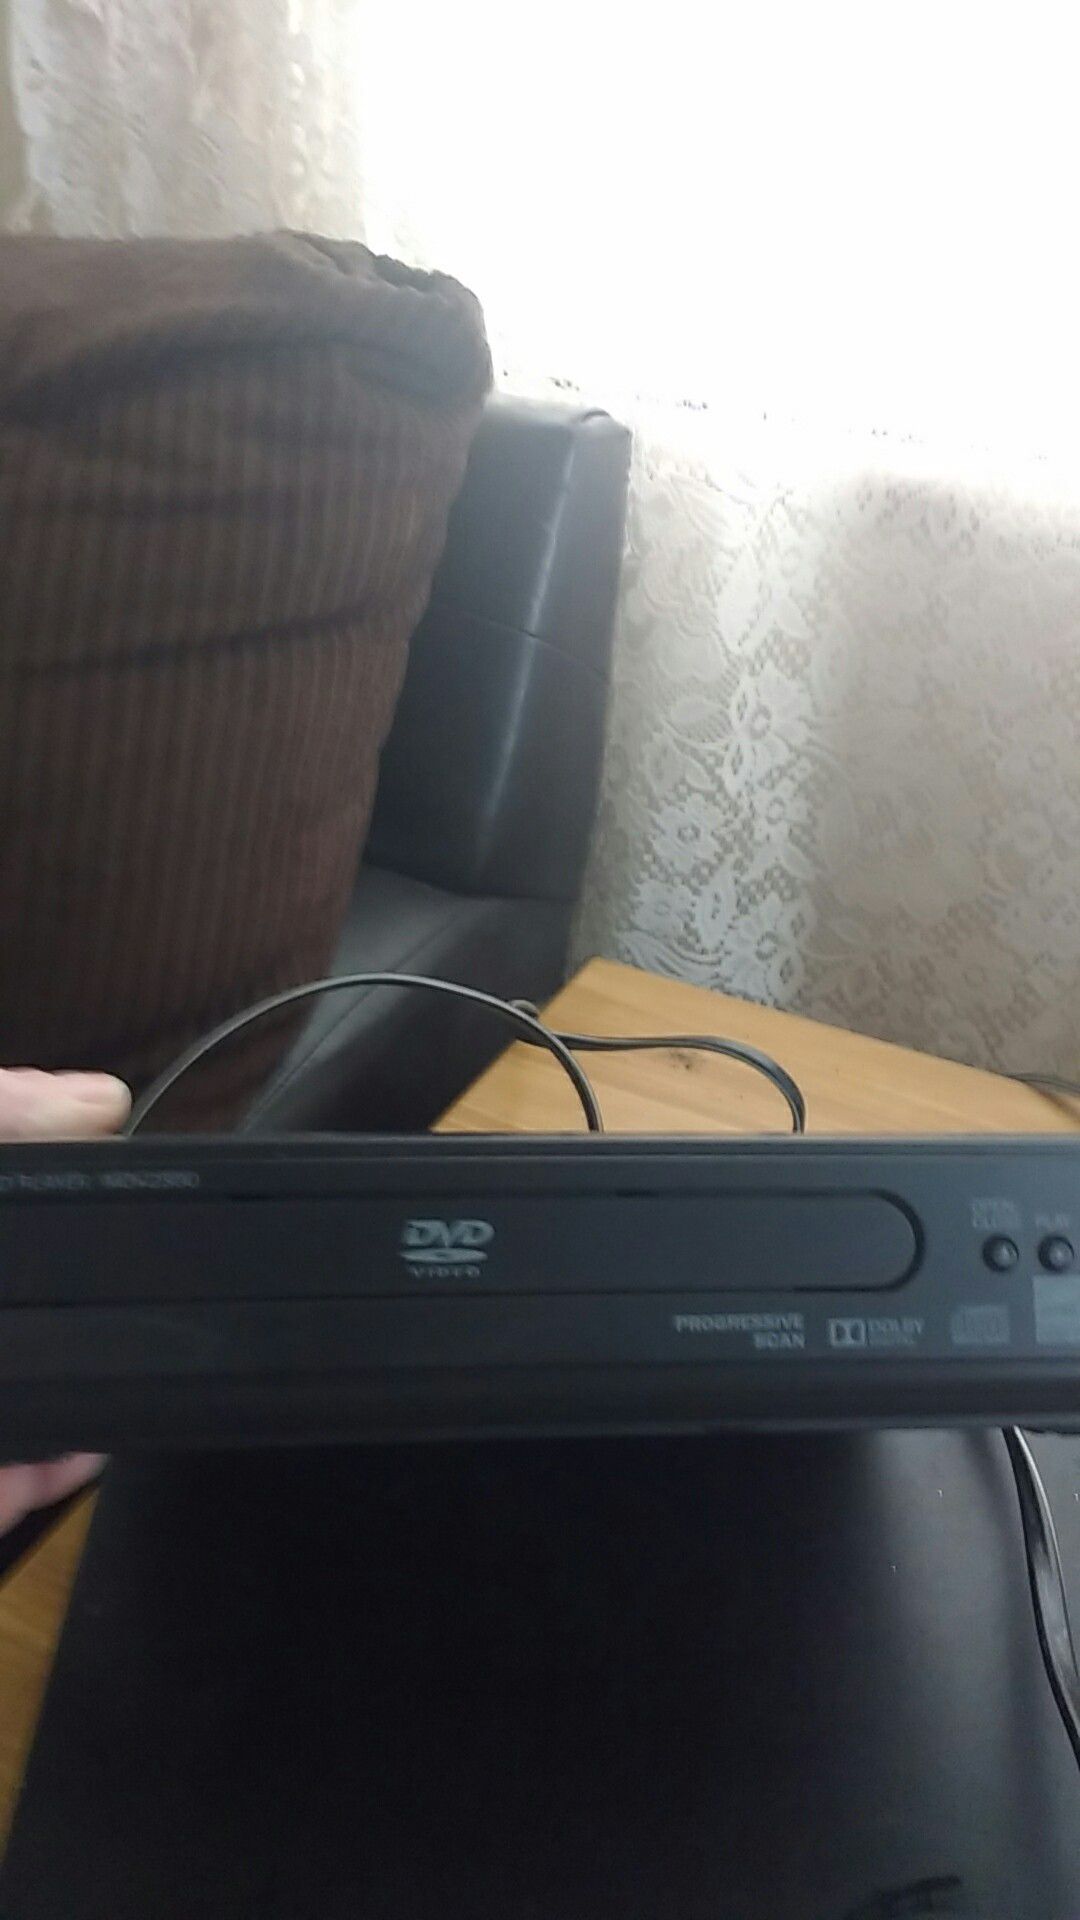 2 DVD players a Magnavox and a progressive scan both one price